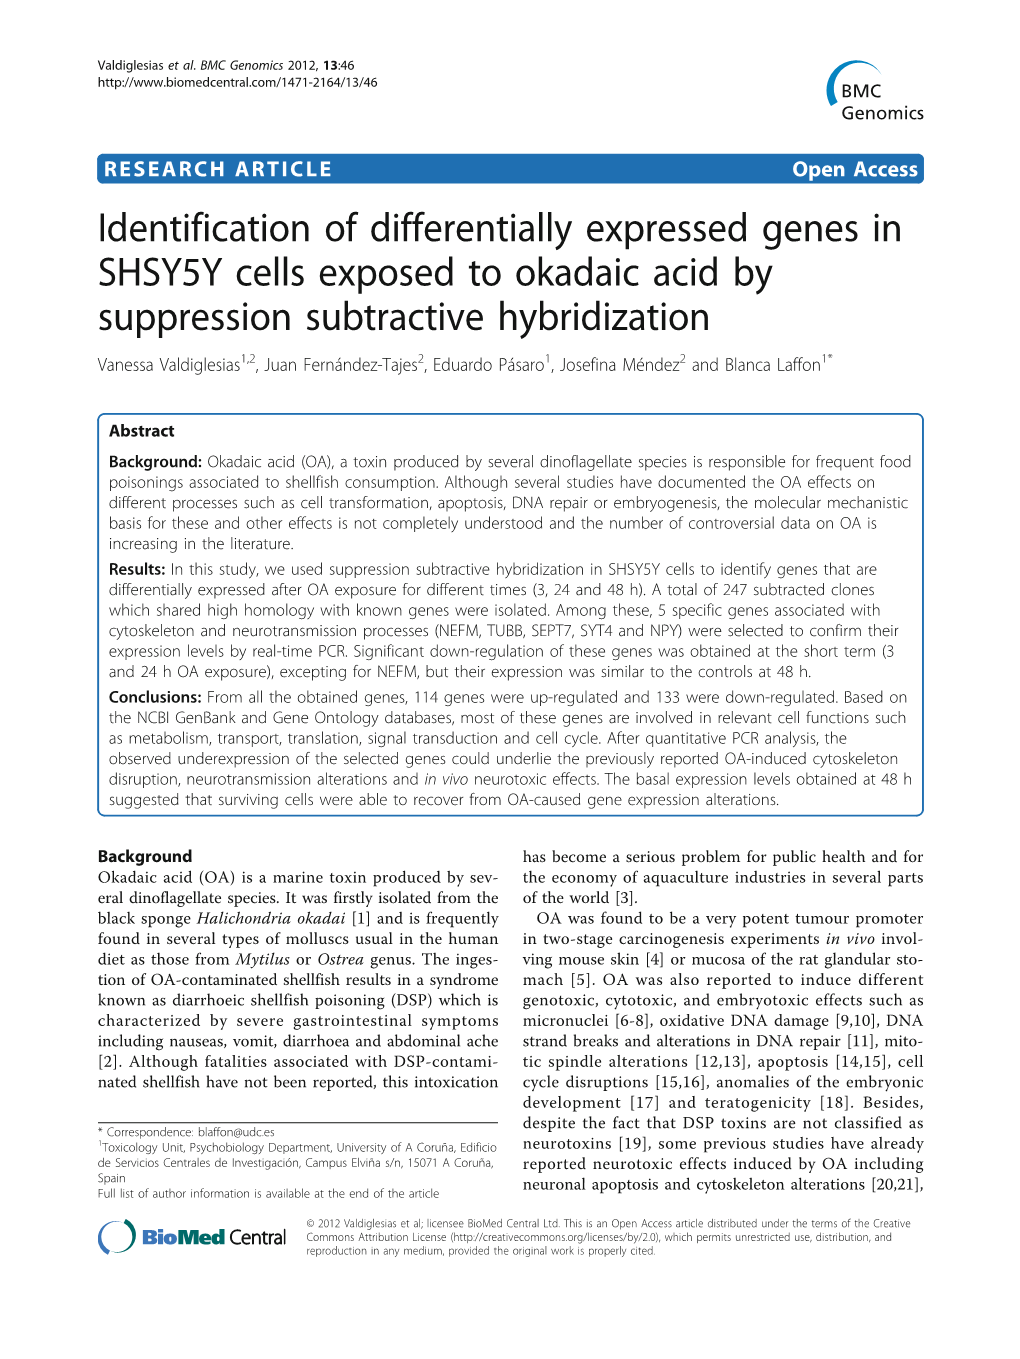 Identification of Differentially Expressed Genes in SHSY5Y Cells